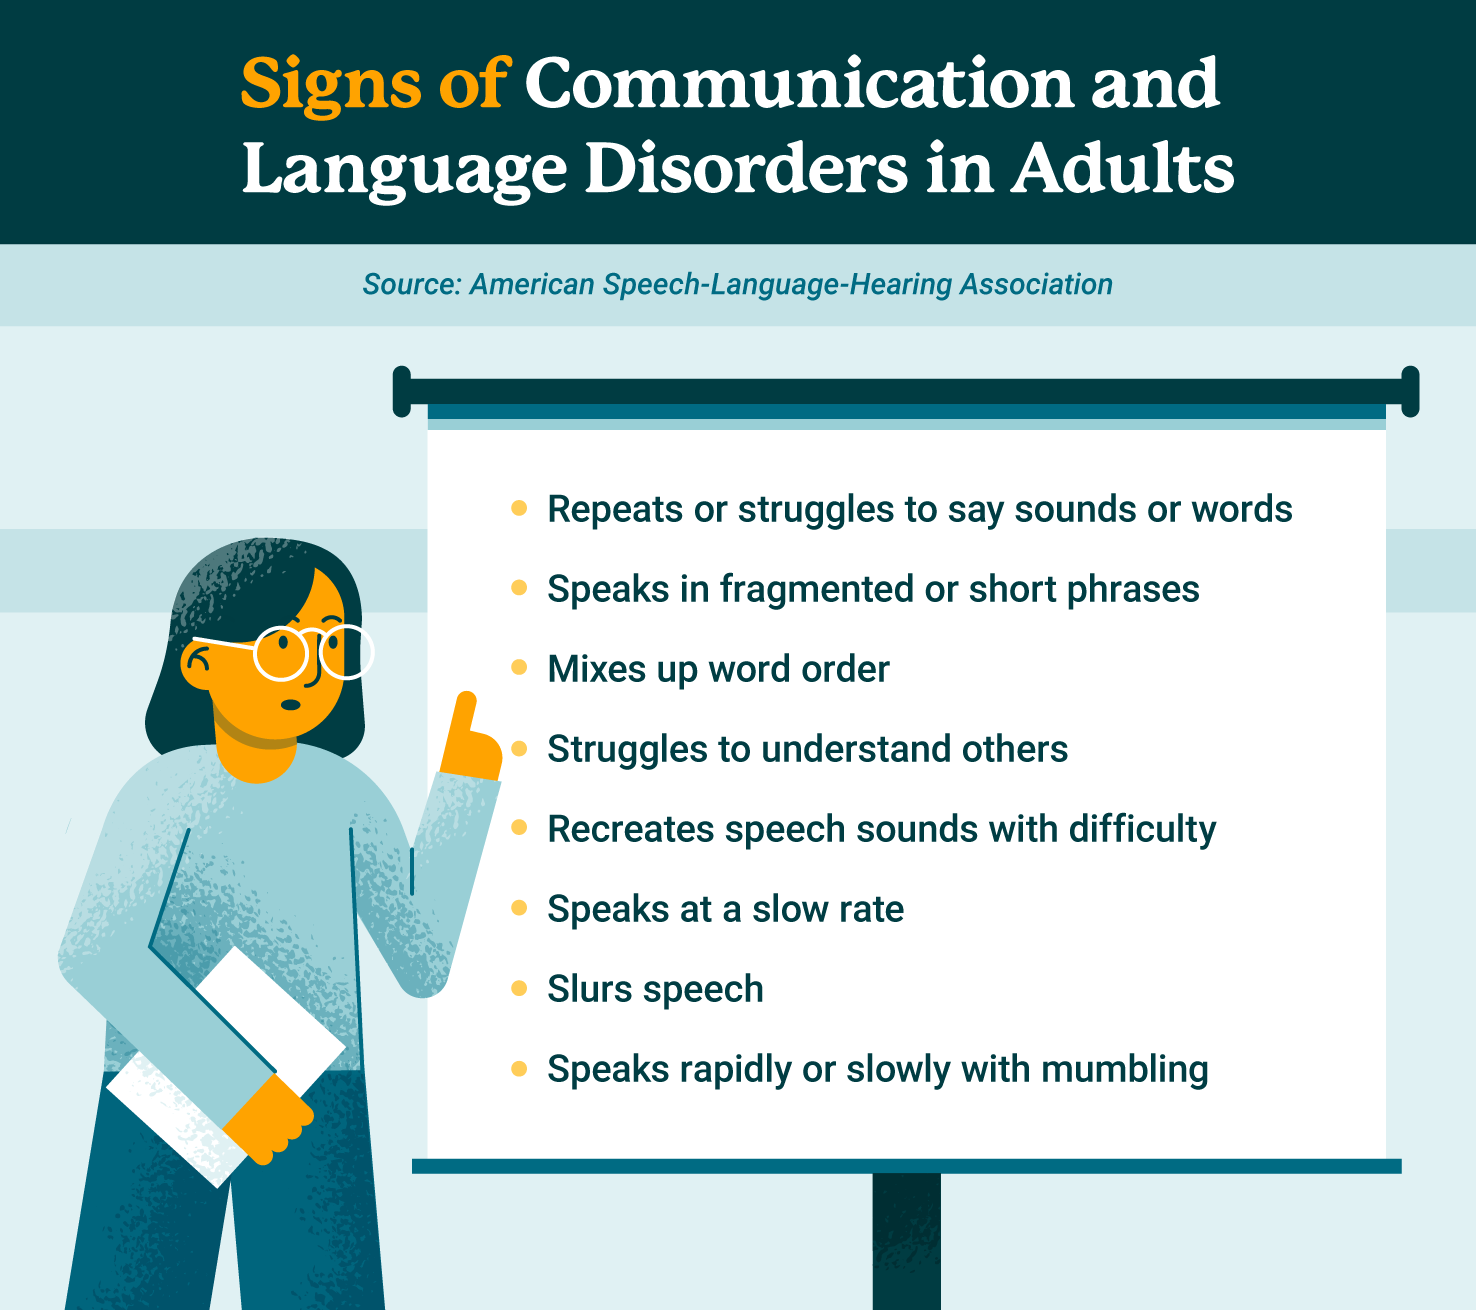 Common signs of communication disorders in adults